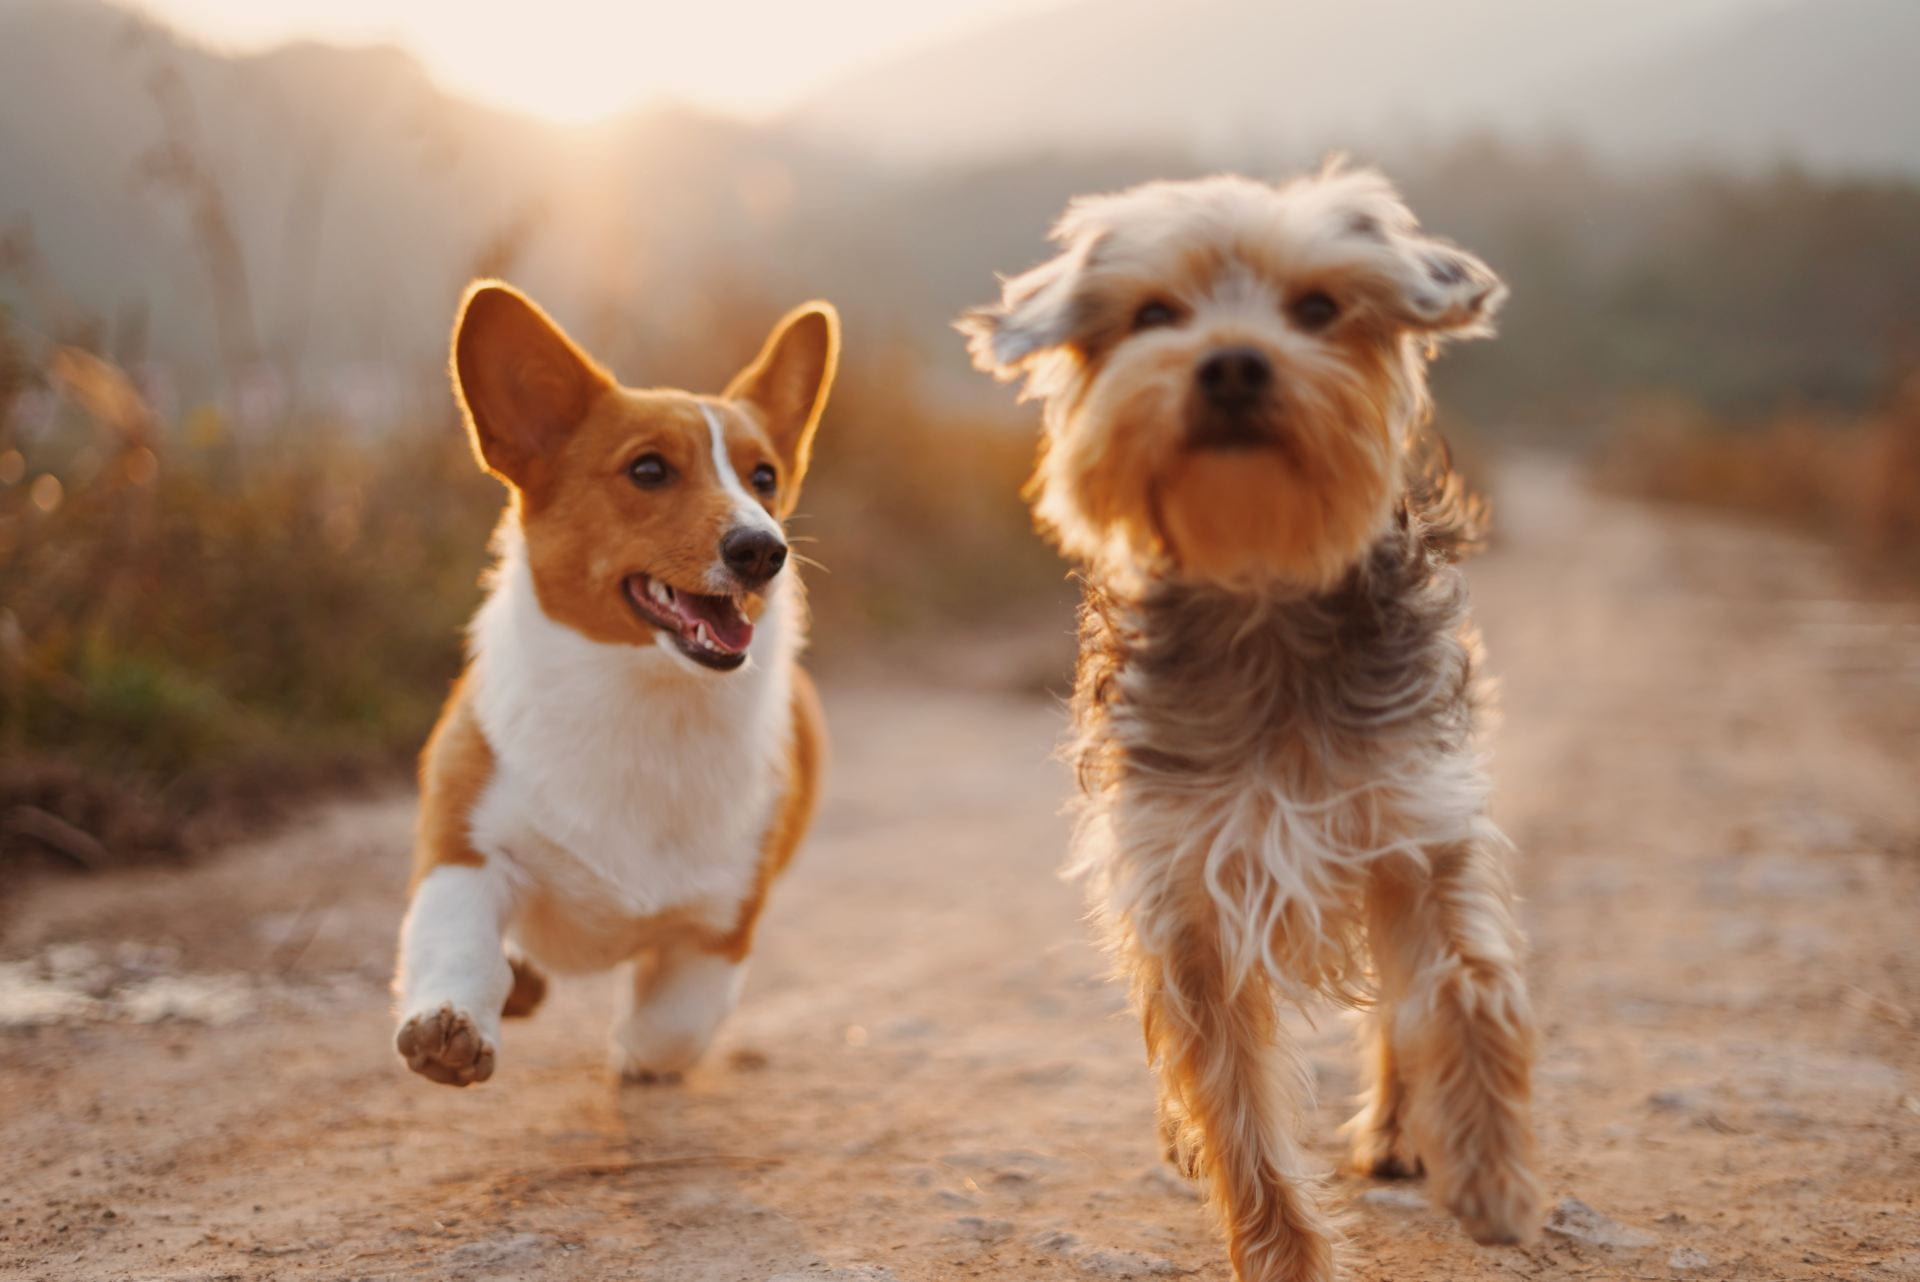 Two small dogs running together